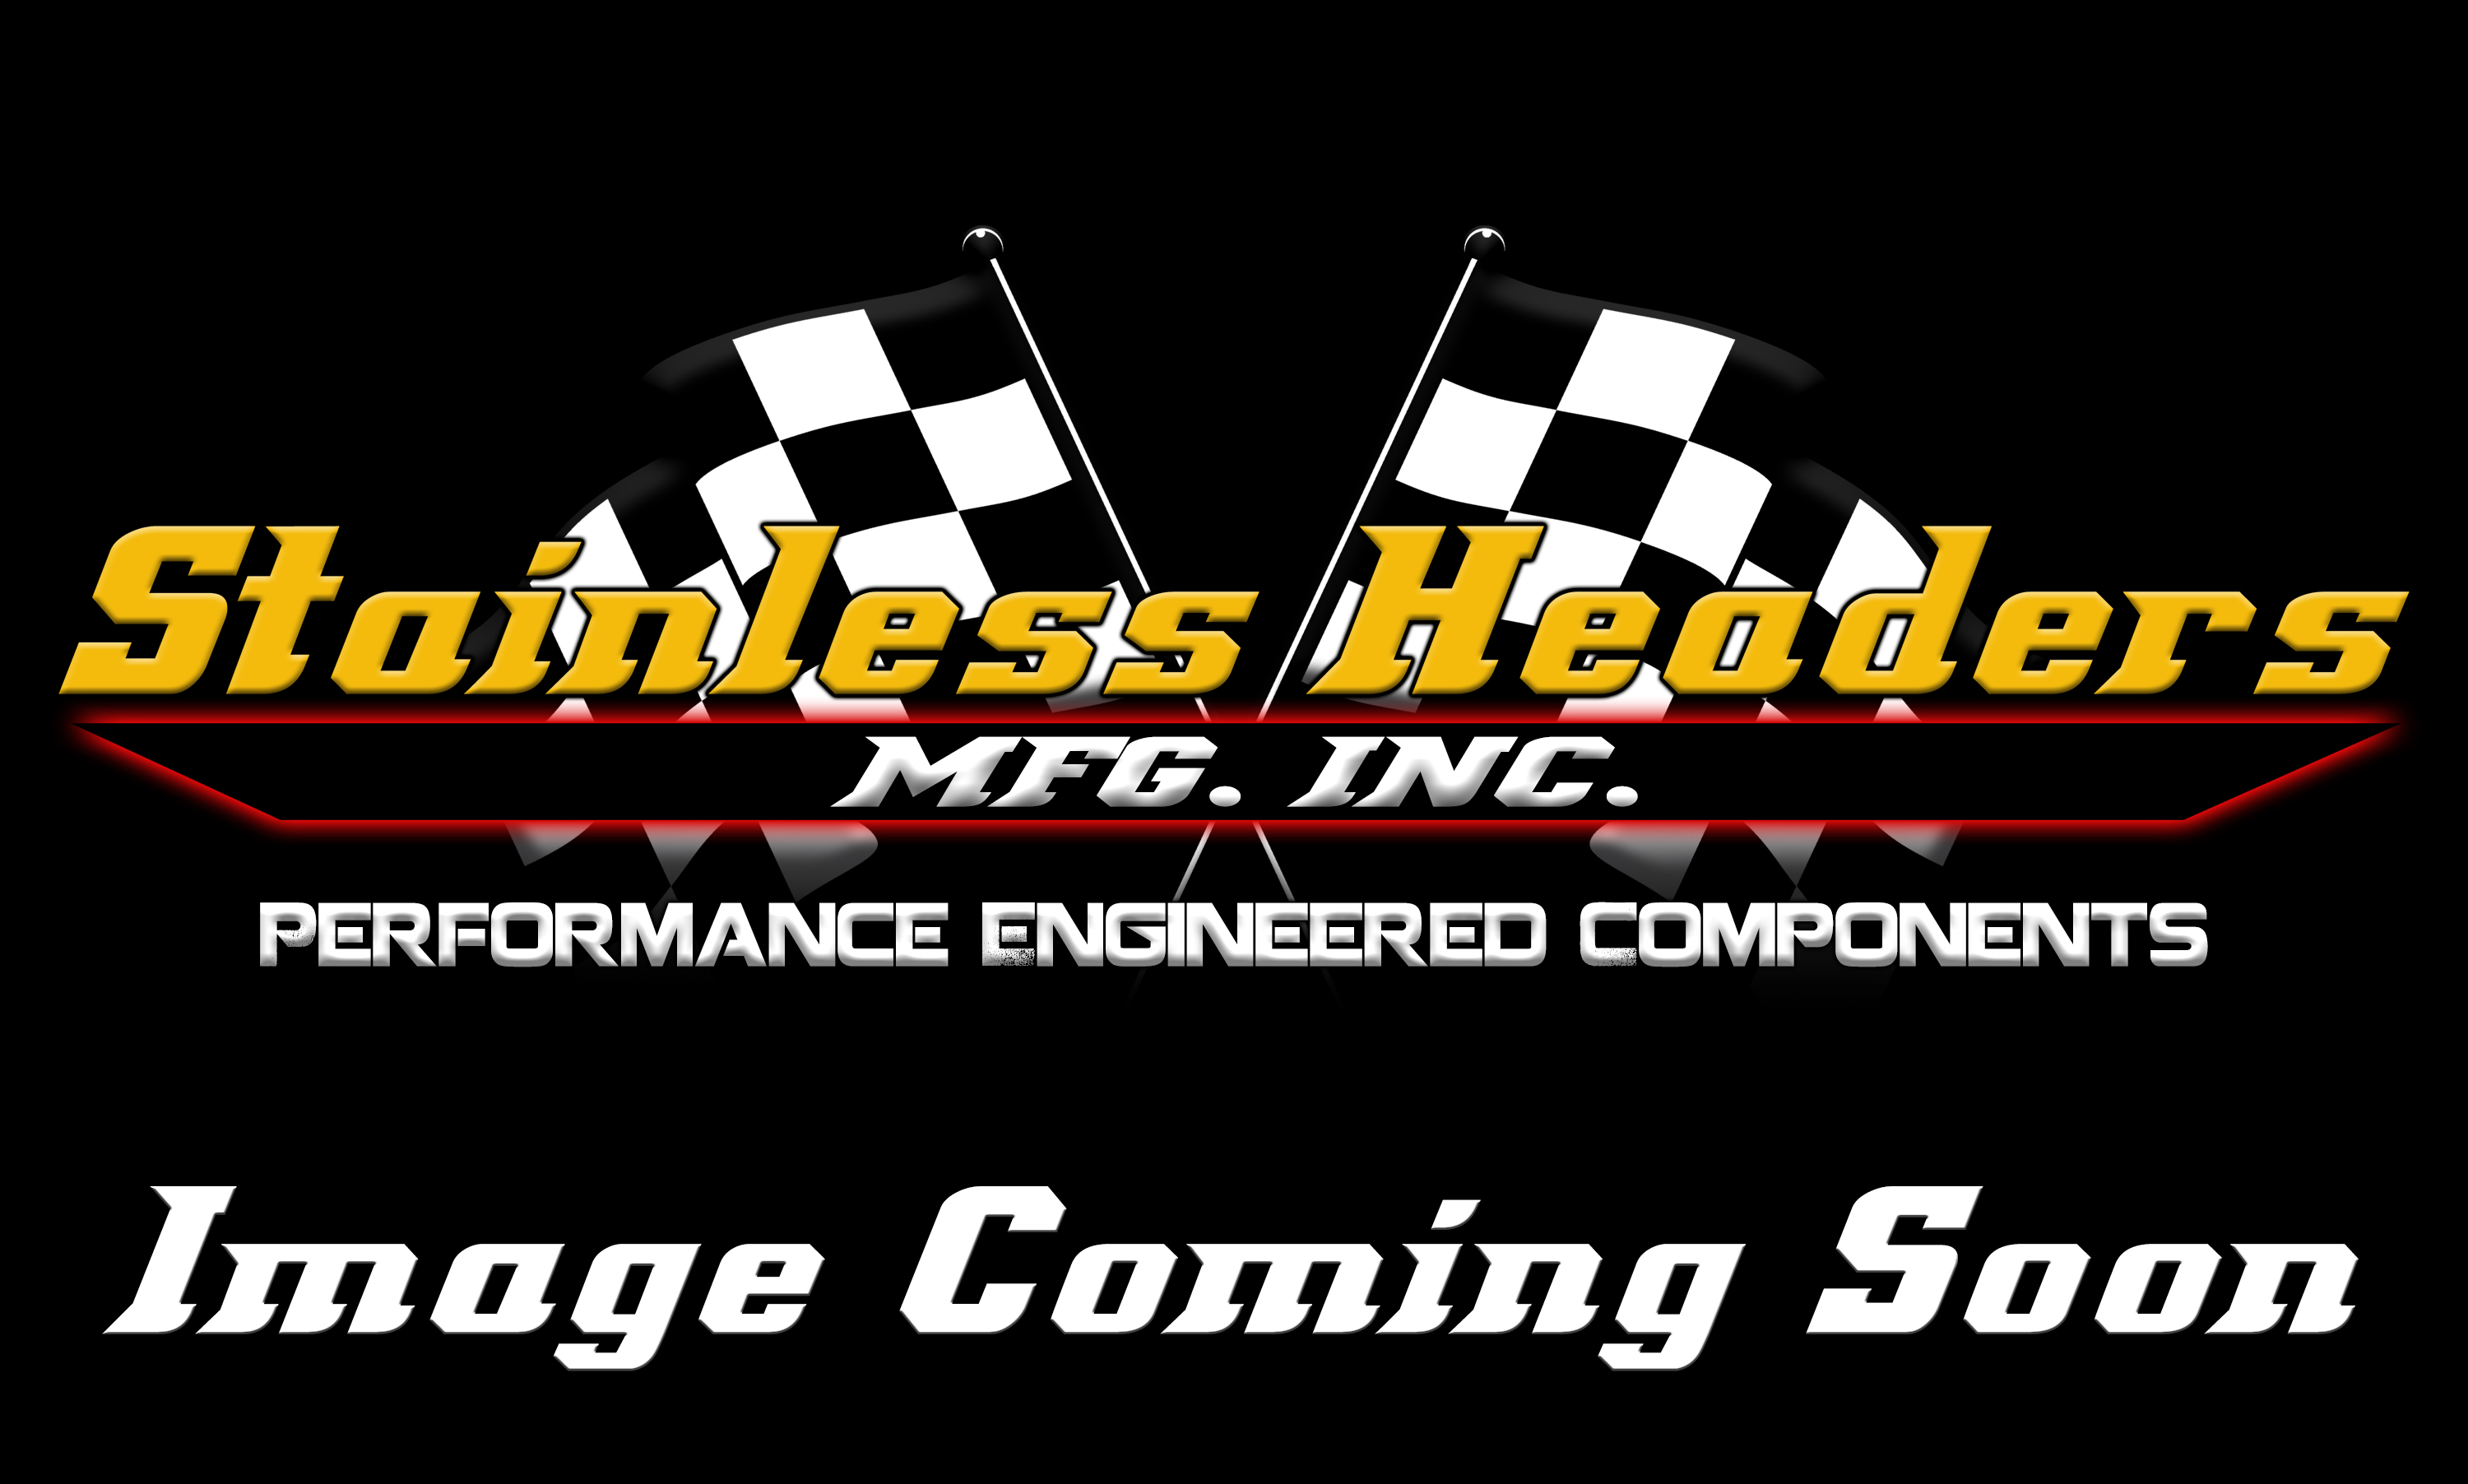 Stainless Headers - 2 3/8" Primary 8 into 1 Performance Merge Collector-18ga 304ss